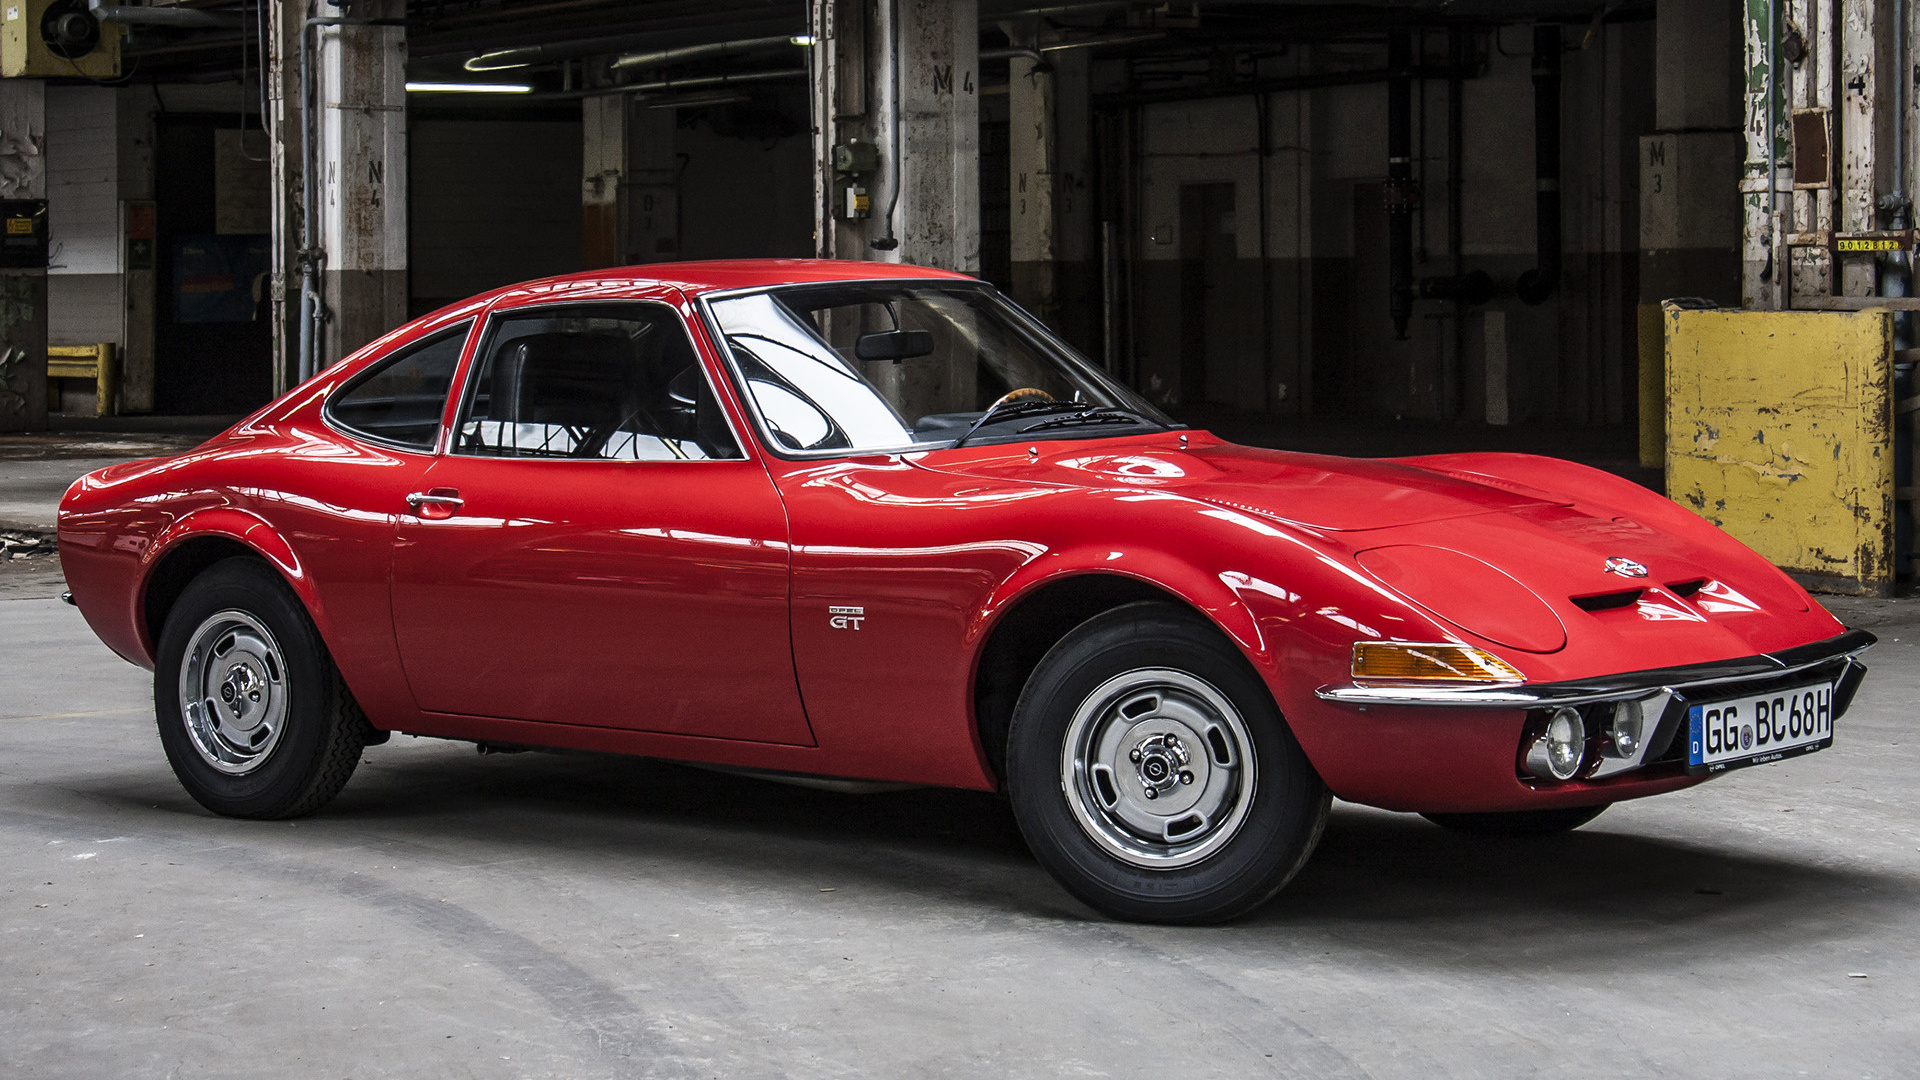 1968 Opel GT - Wallpapers and HD Images | Car Pixel